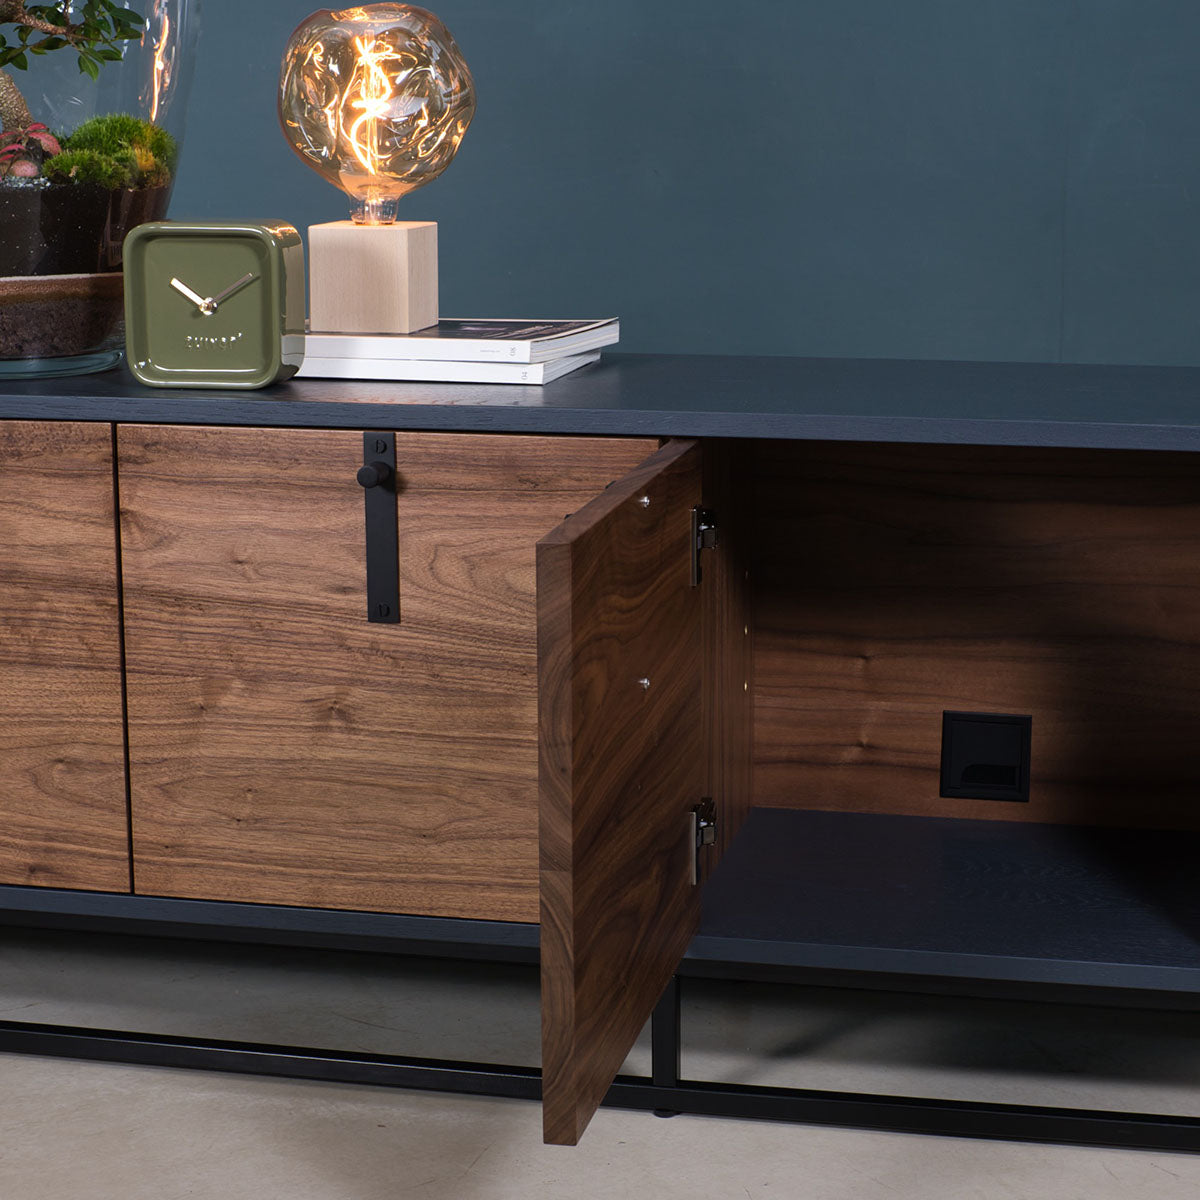 An image of the Walnut TV Stand, Nea product available from Koda Studios